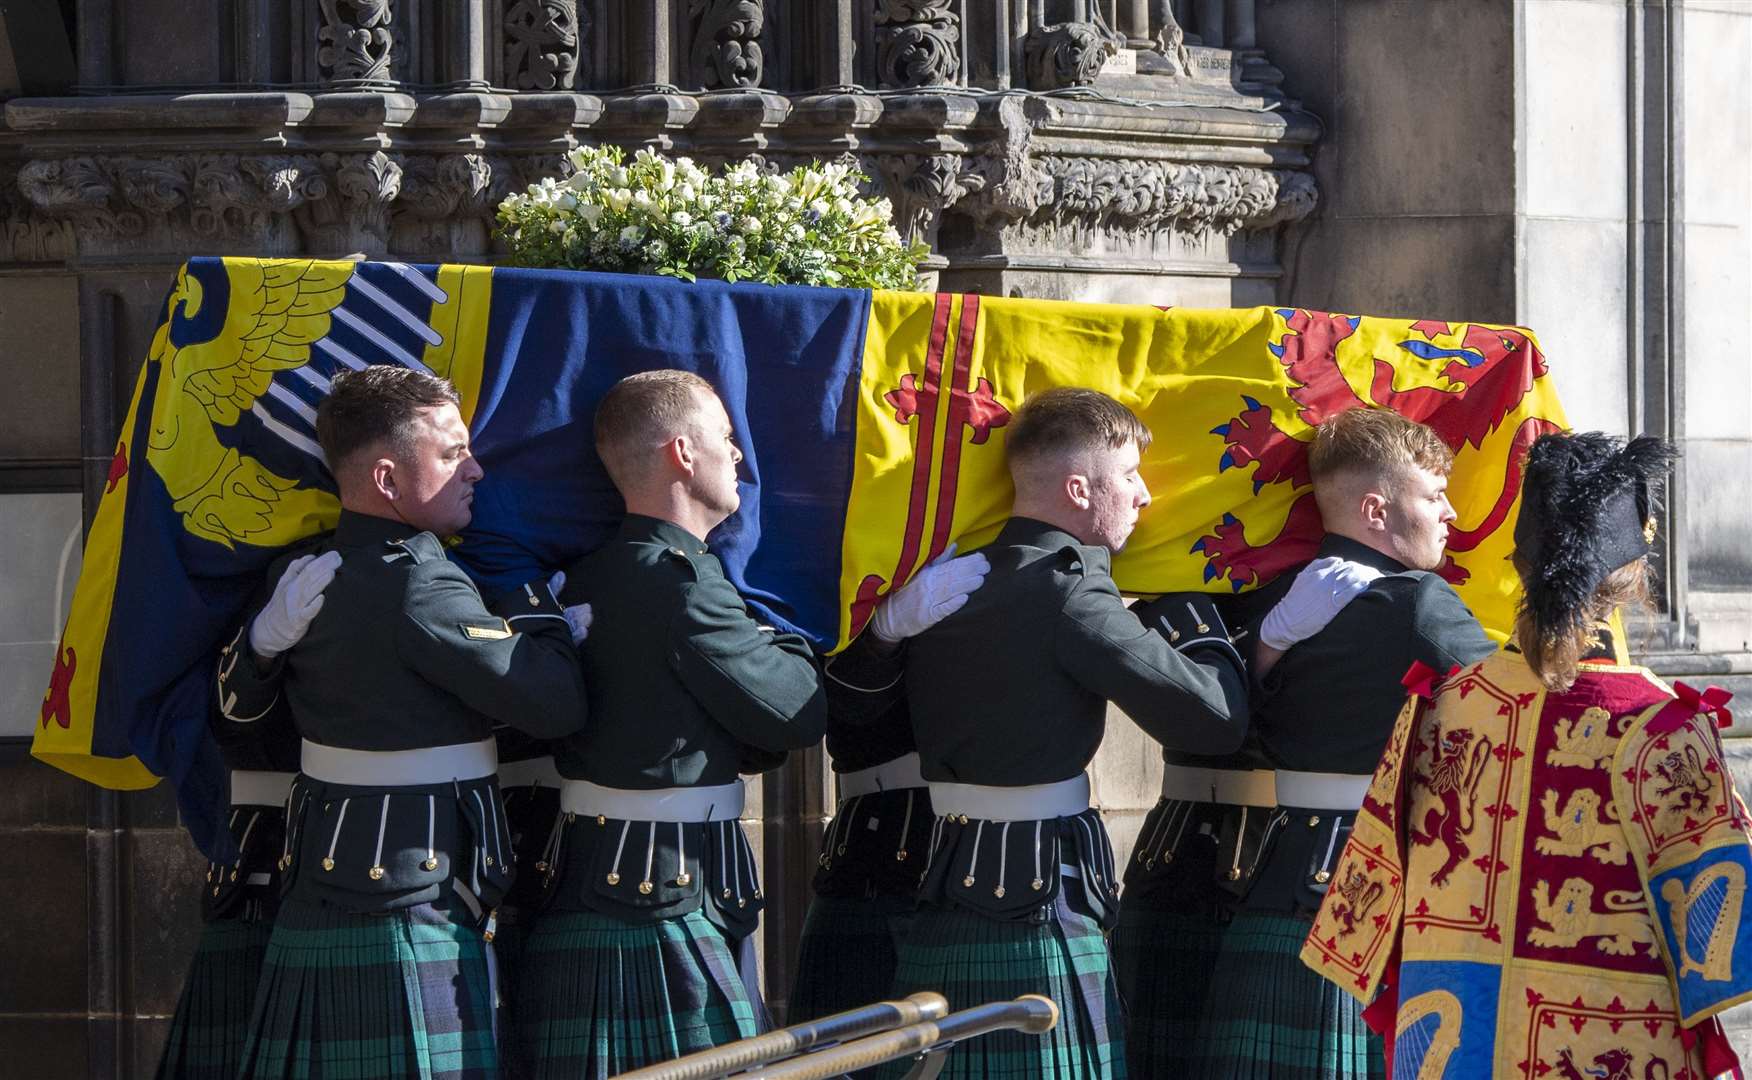 The coffin of the Queen is taken to a hearse as it departs St Giles’ Cathedral (Lesley Martin/PA)